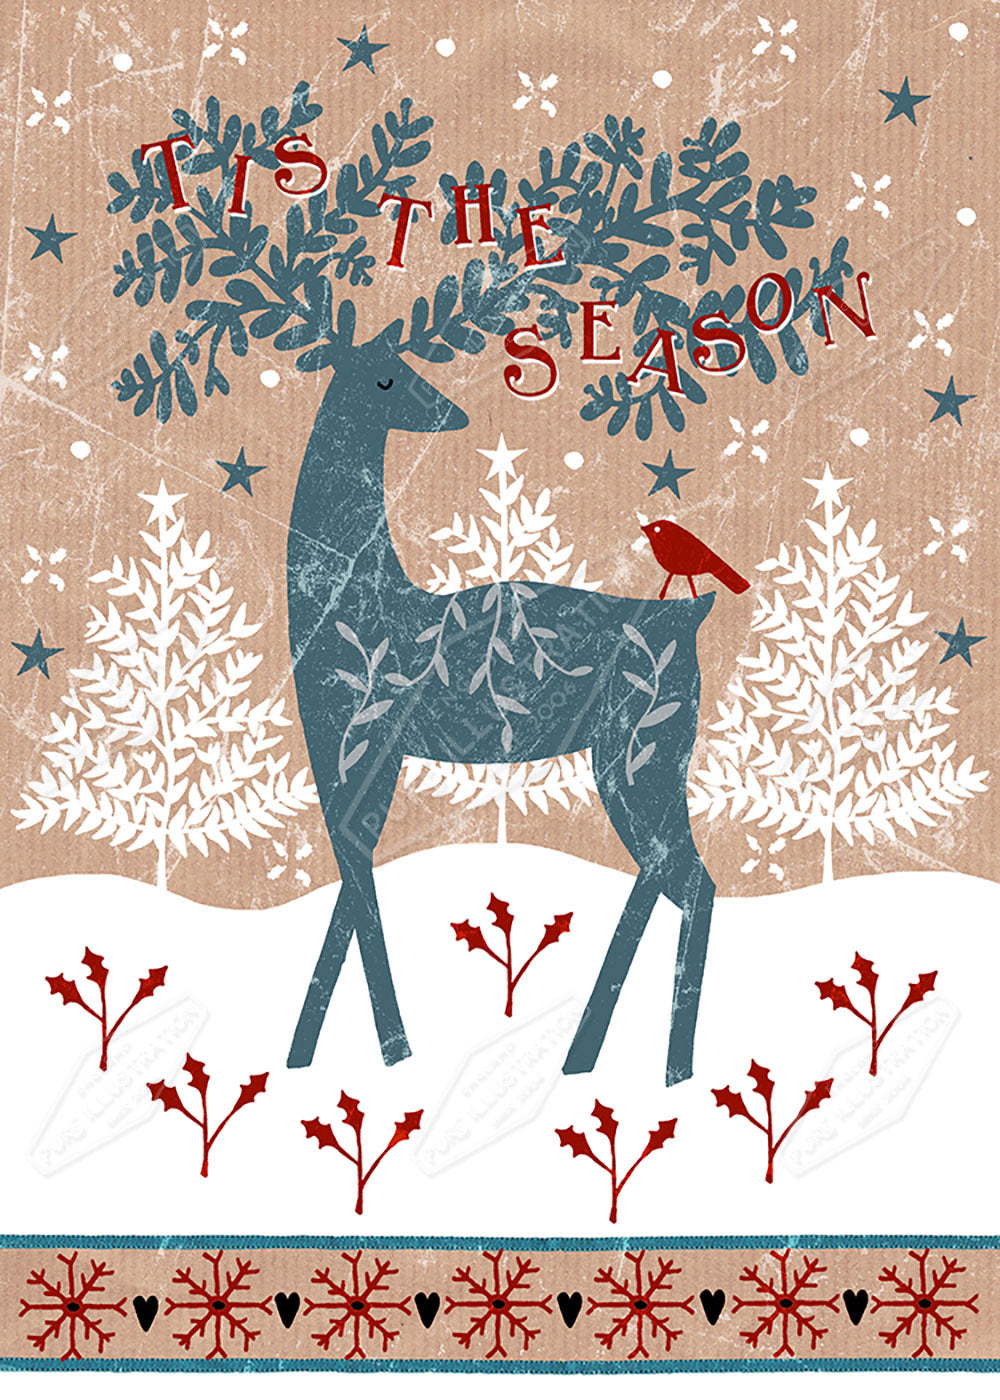 00024239SSN- Sian Summerhayes is represented by Pure Art Licensing Agency - Christmas Greeting Card Design